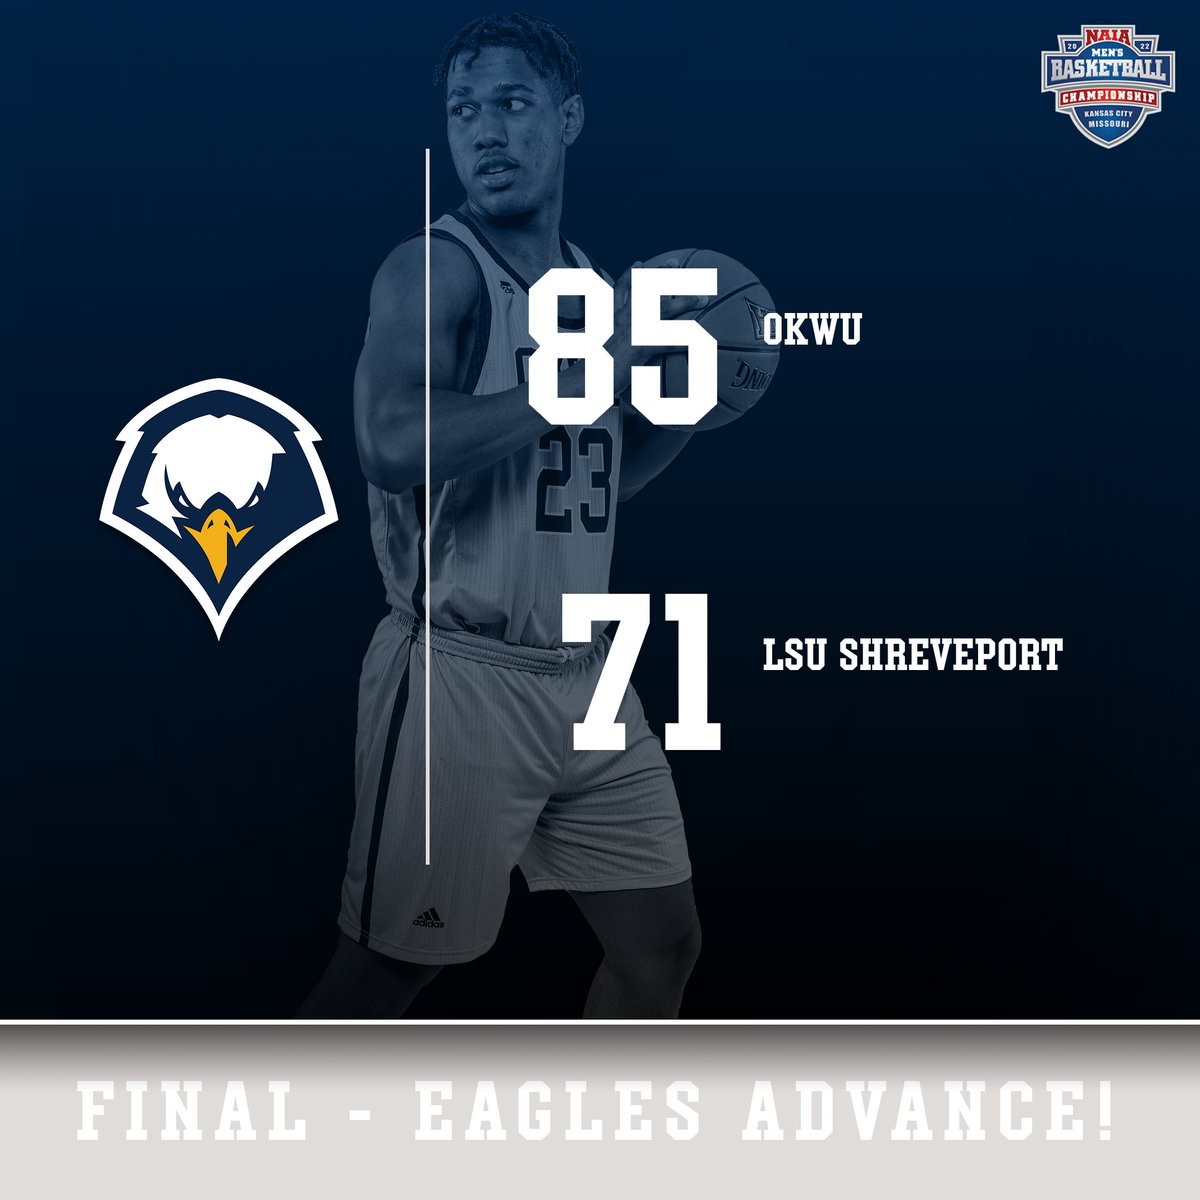 Final from KC: @OKWUeagles_MBB defeats LSU Shreveport 85-71 in the Round of 16!